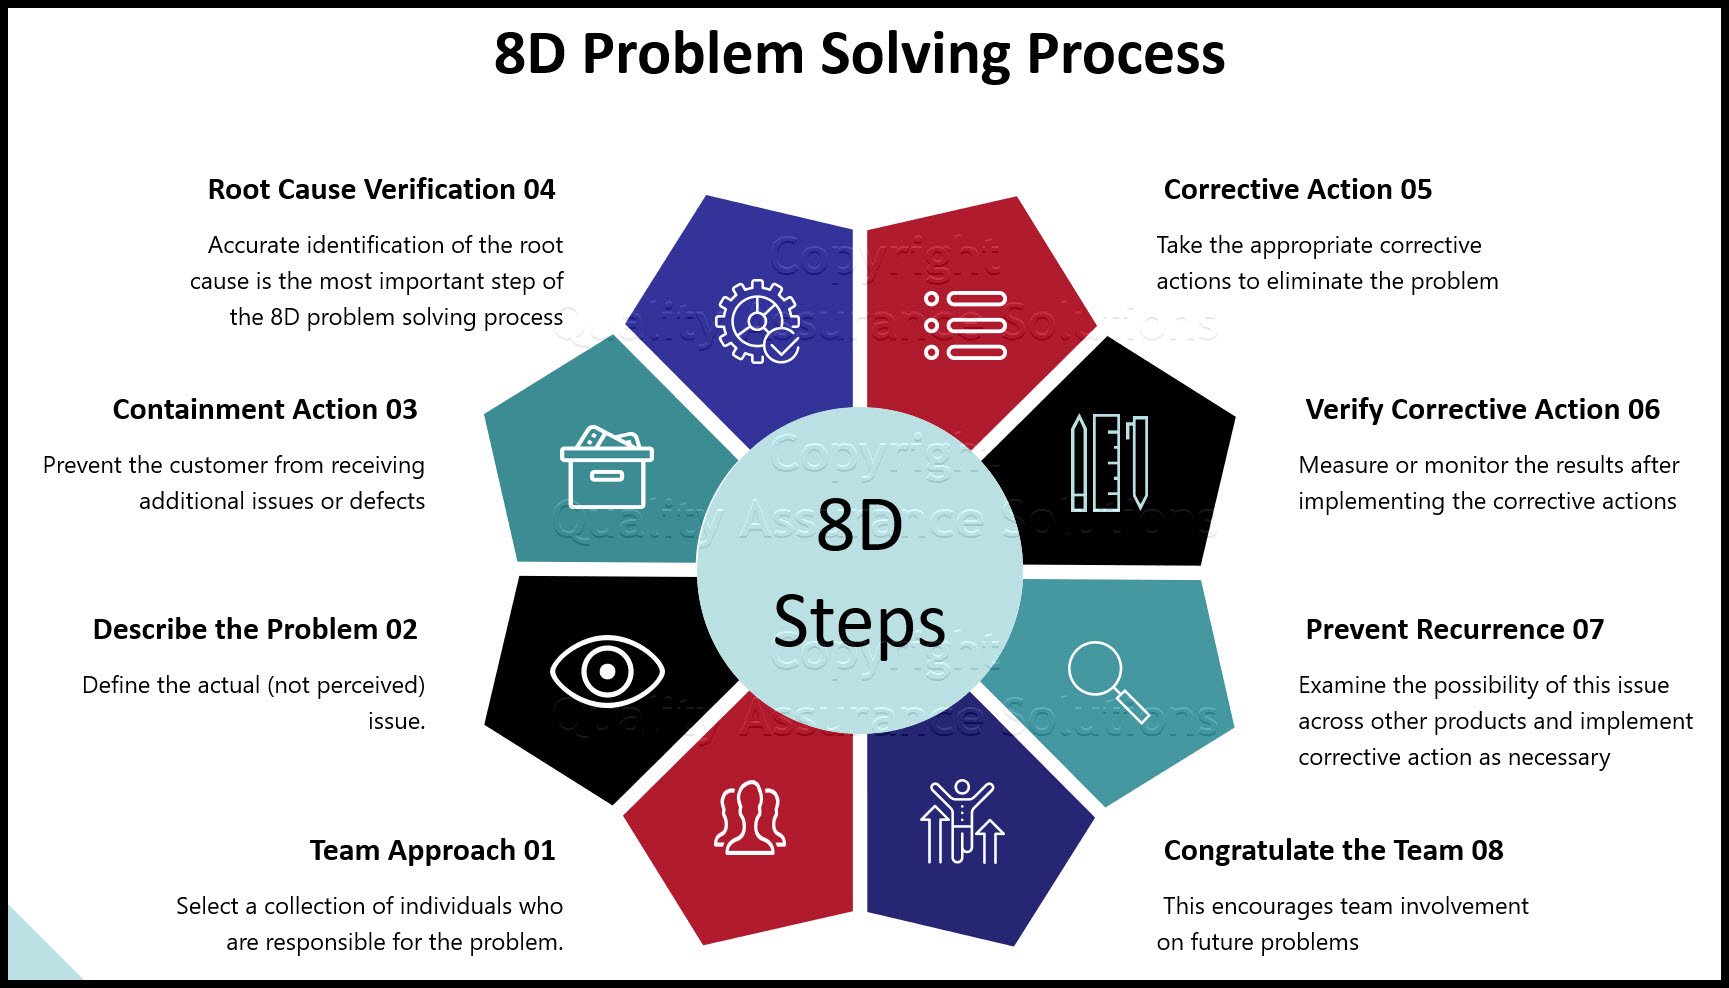 the most important step in the 8d problem solving process is